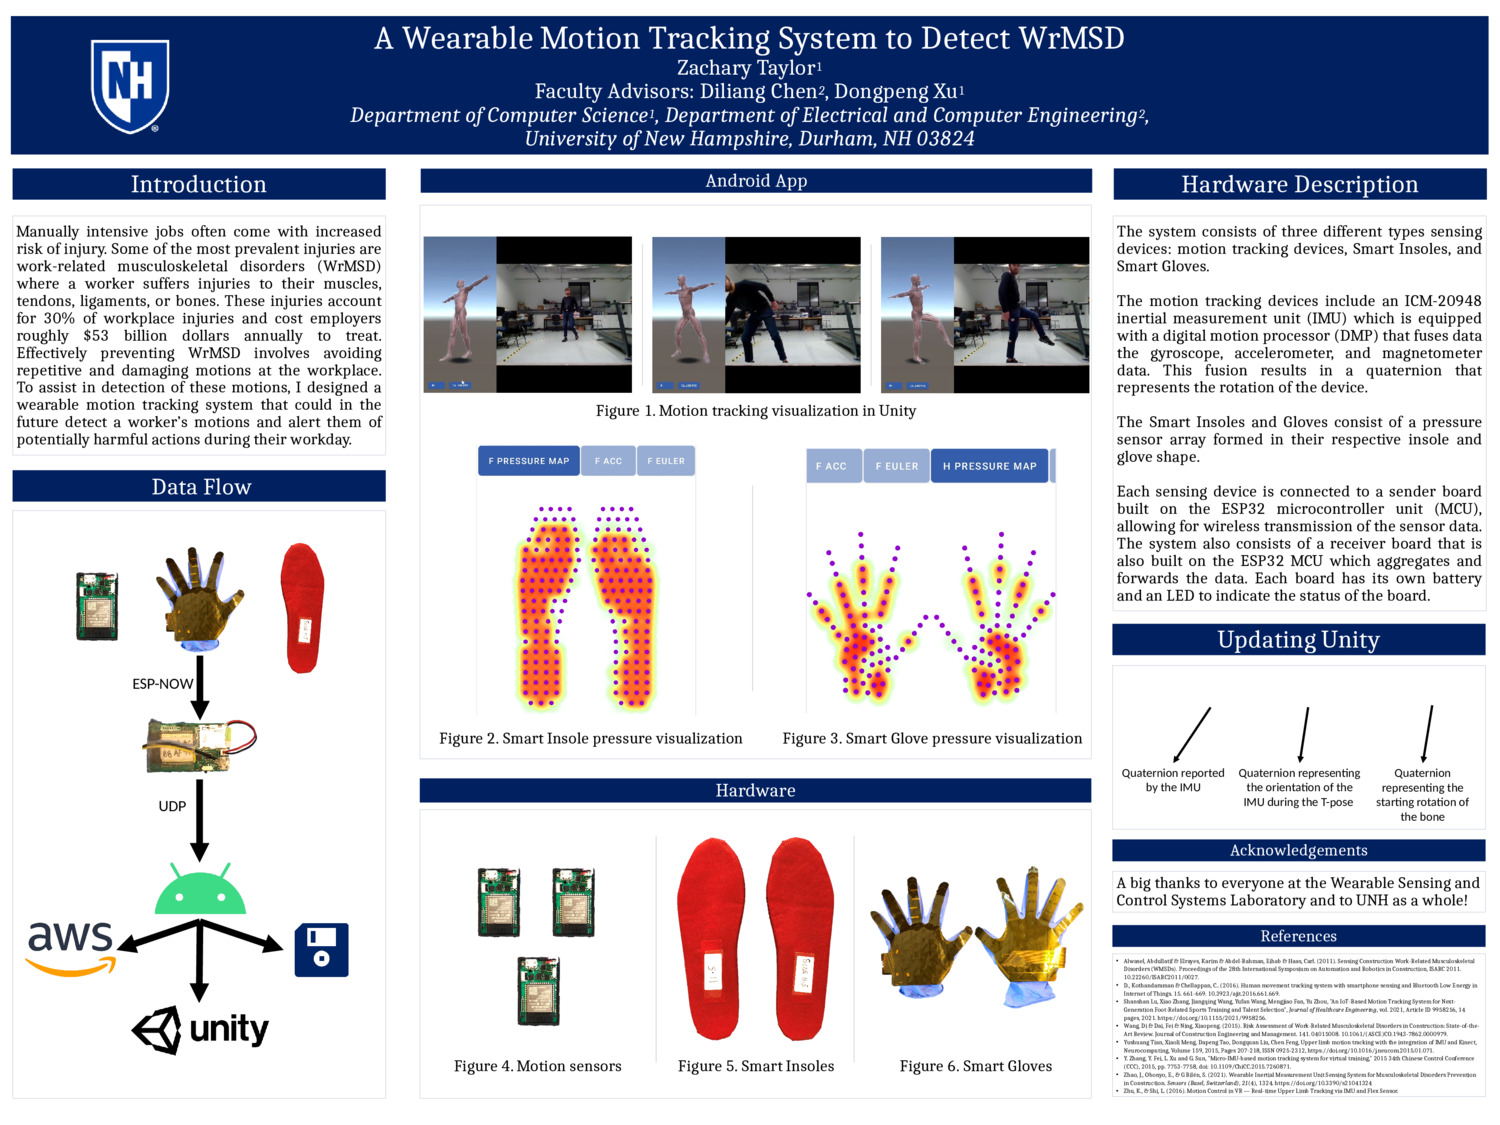 A Wearable Motion Tracking System To Detect Wrmsd by zmt1002